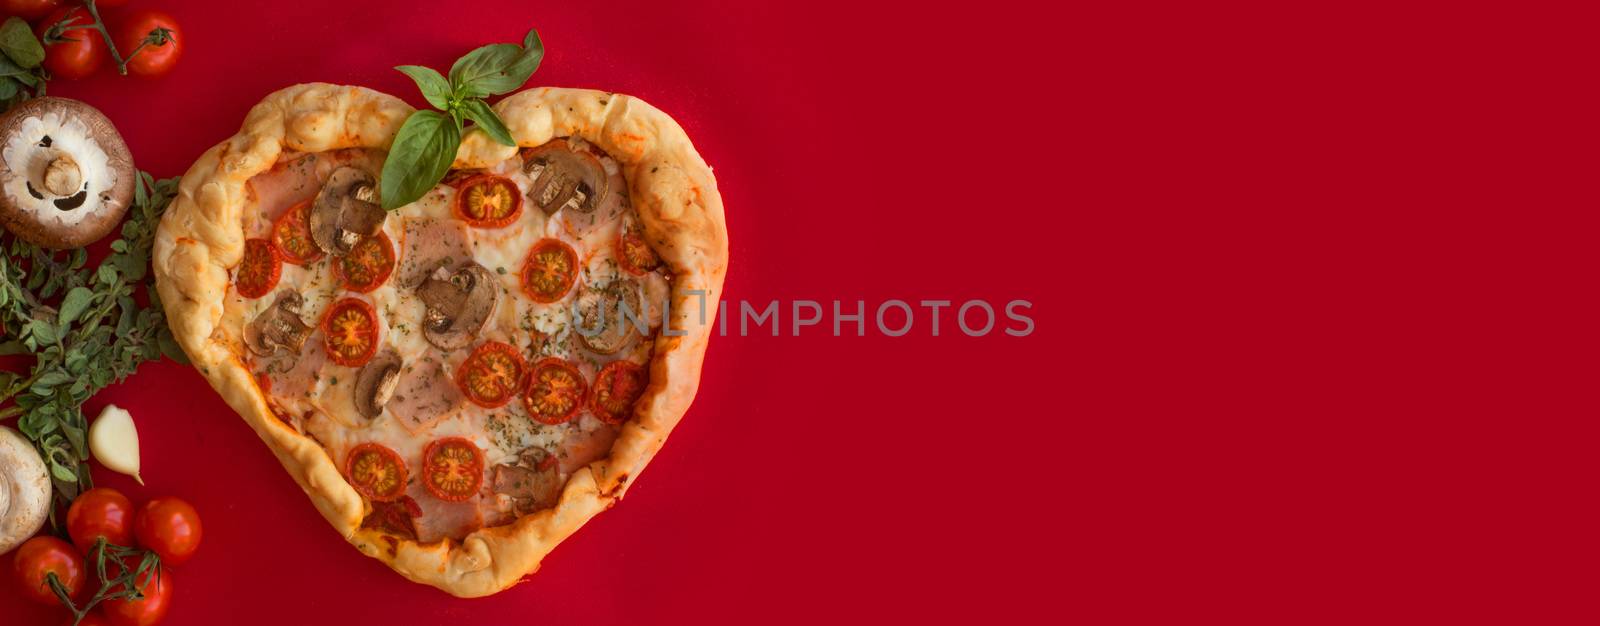 Pizza heart shaped with ham tomatoes and mushrooms on red background . Concept of romantic love for Valentines Day . Love food